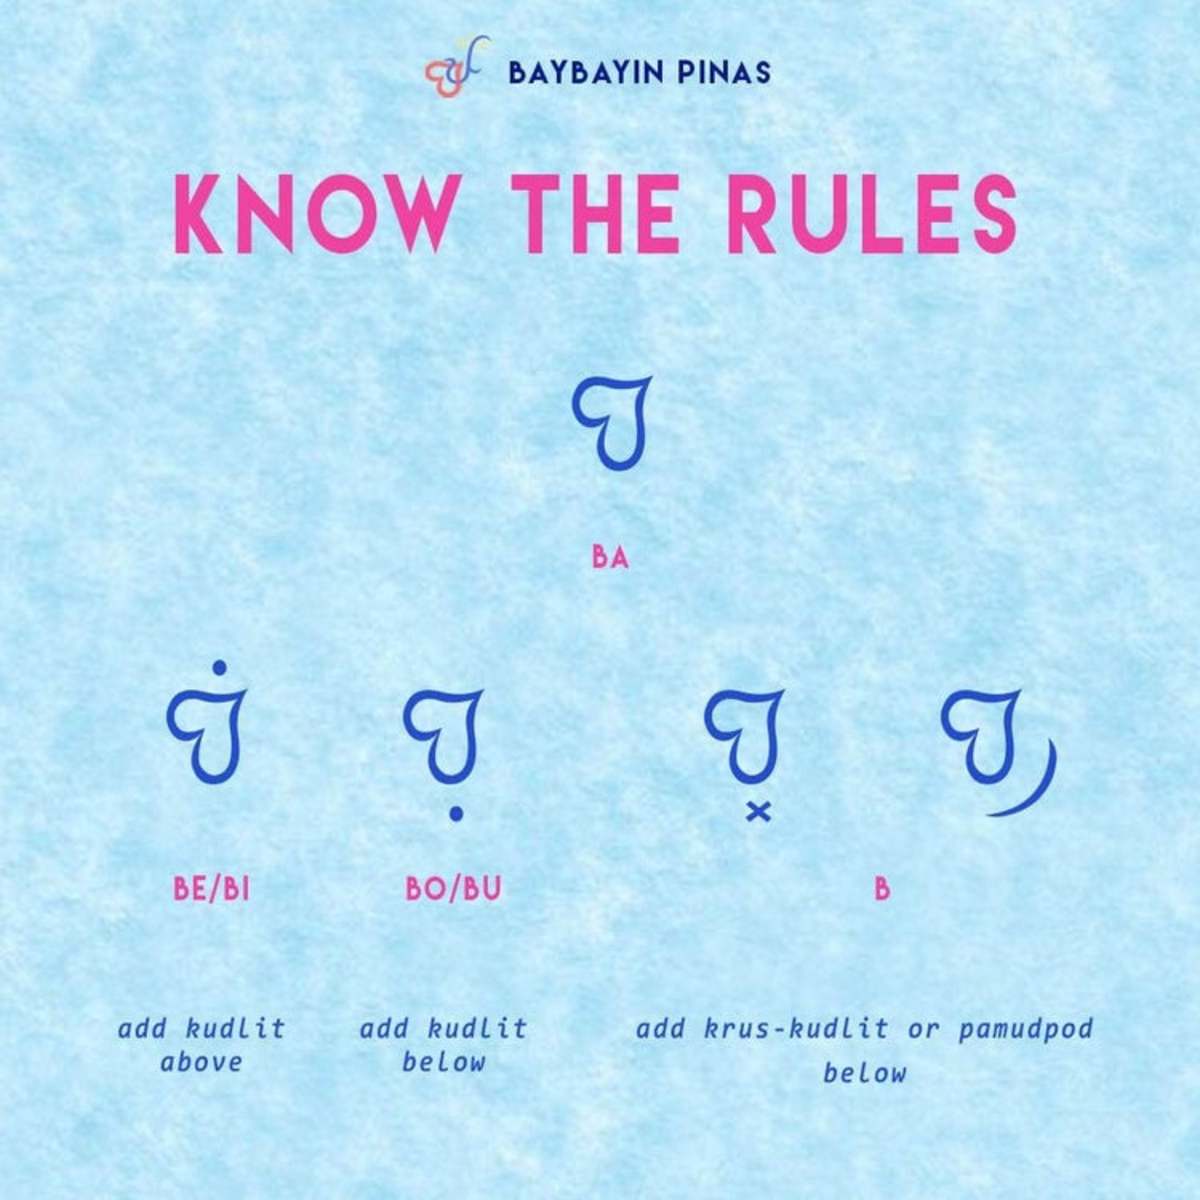 Know the simple rules for writing and reading in Baybayin.